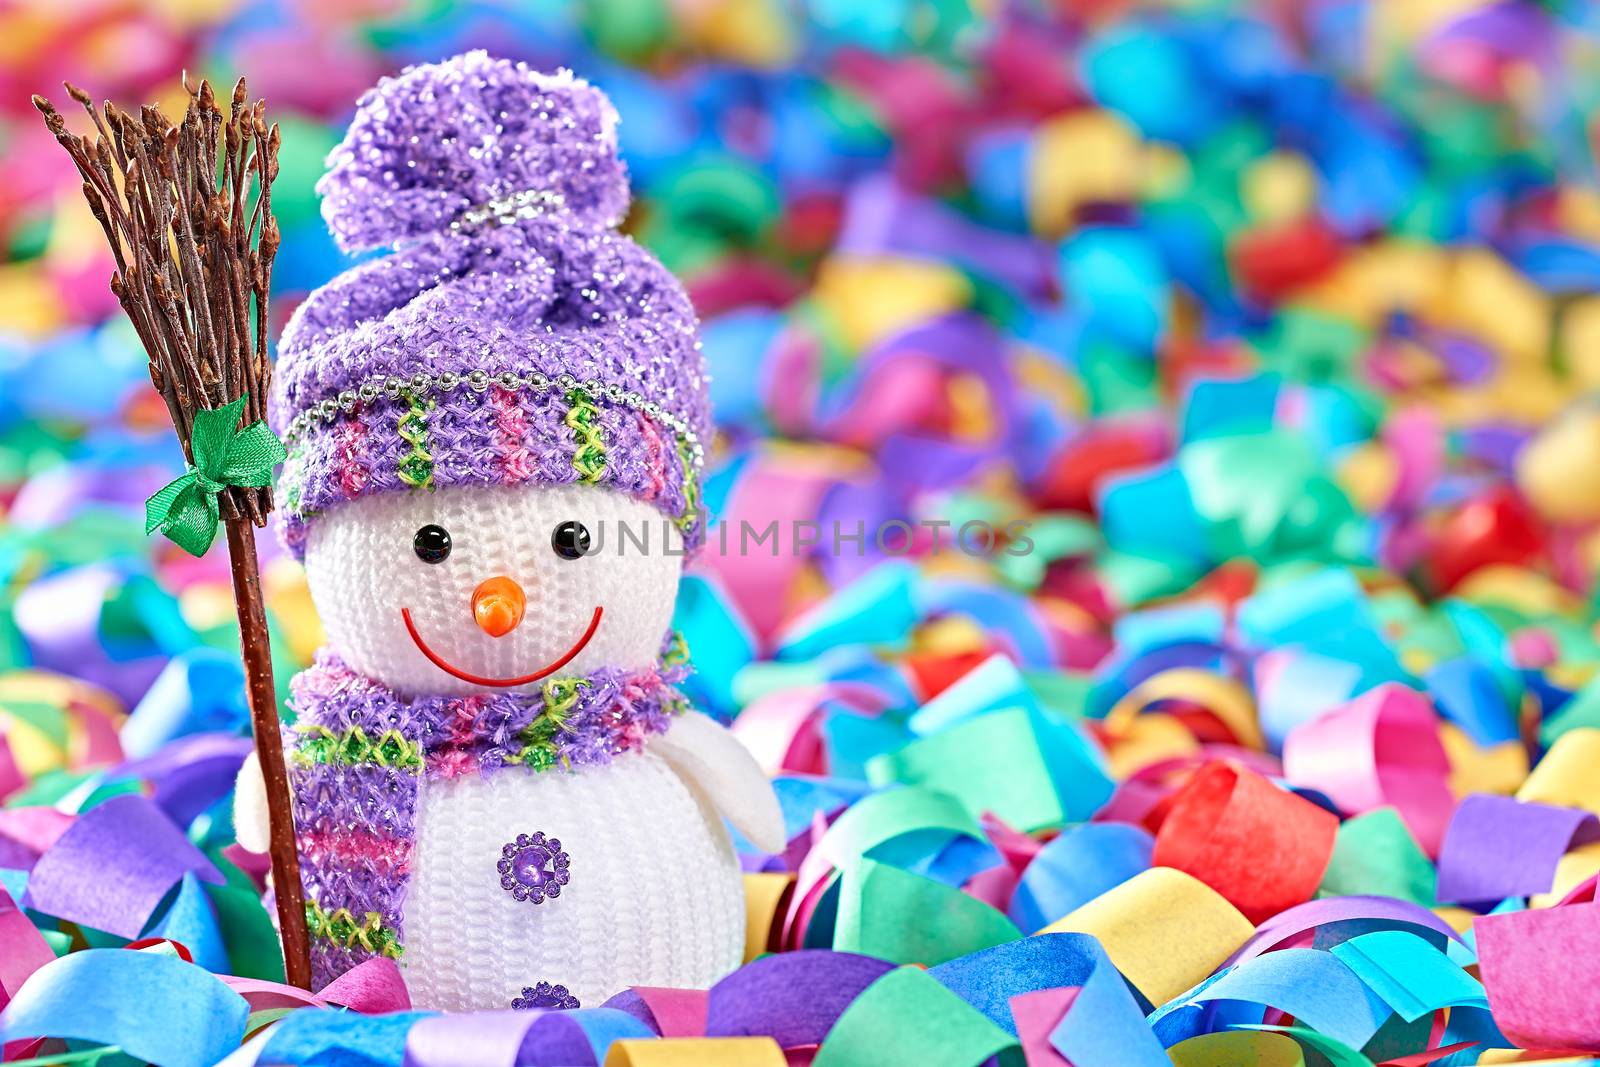 New Year 2016. Happy Snowman. Party decoration multicolored serpentine confetti. Cheerful fun winter holiday, copyspace.Snowman celebration in festive hat, scarf smiling with broom, festive background